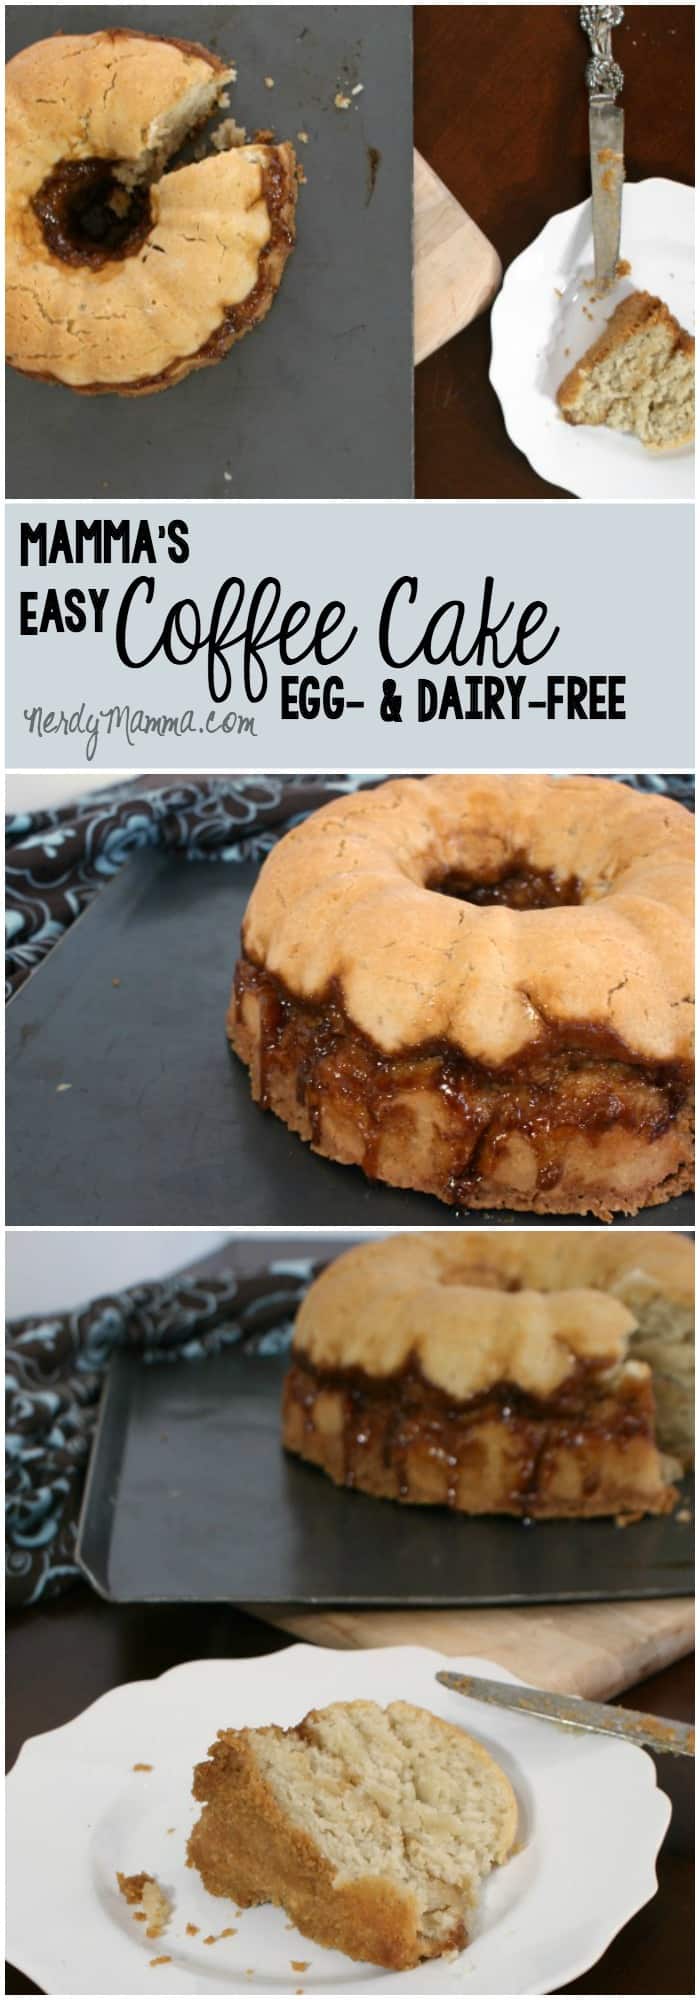 I can't believe how easy this coffee cake was to make and, get this, it's eggless and dairy-free! LOVE!